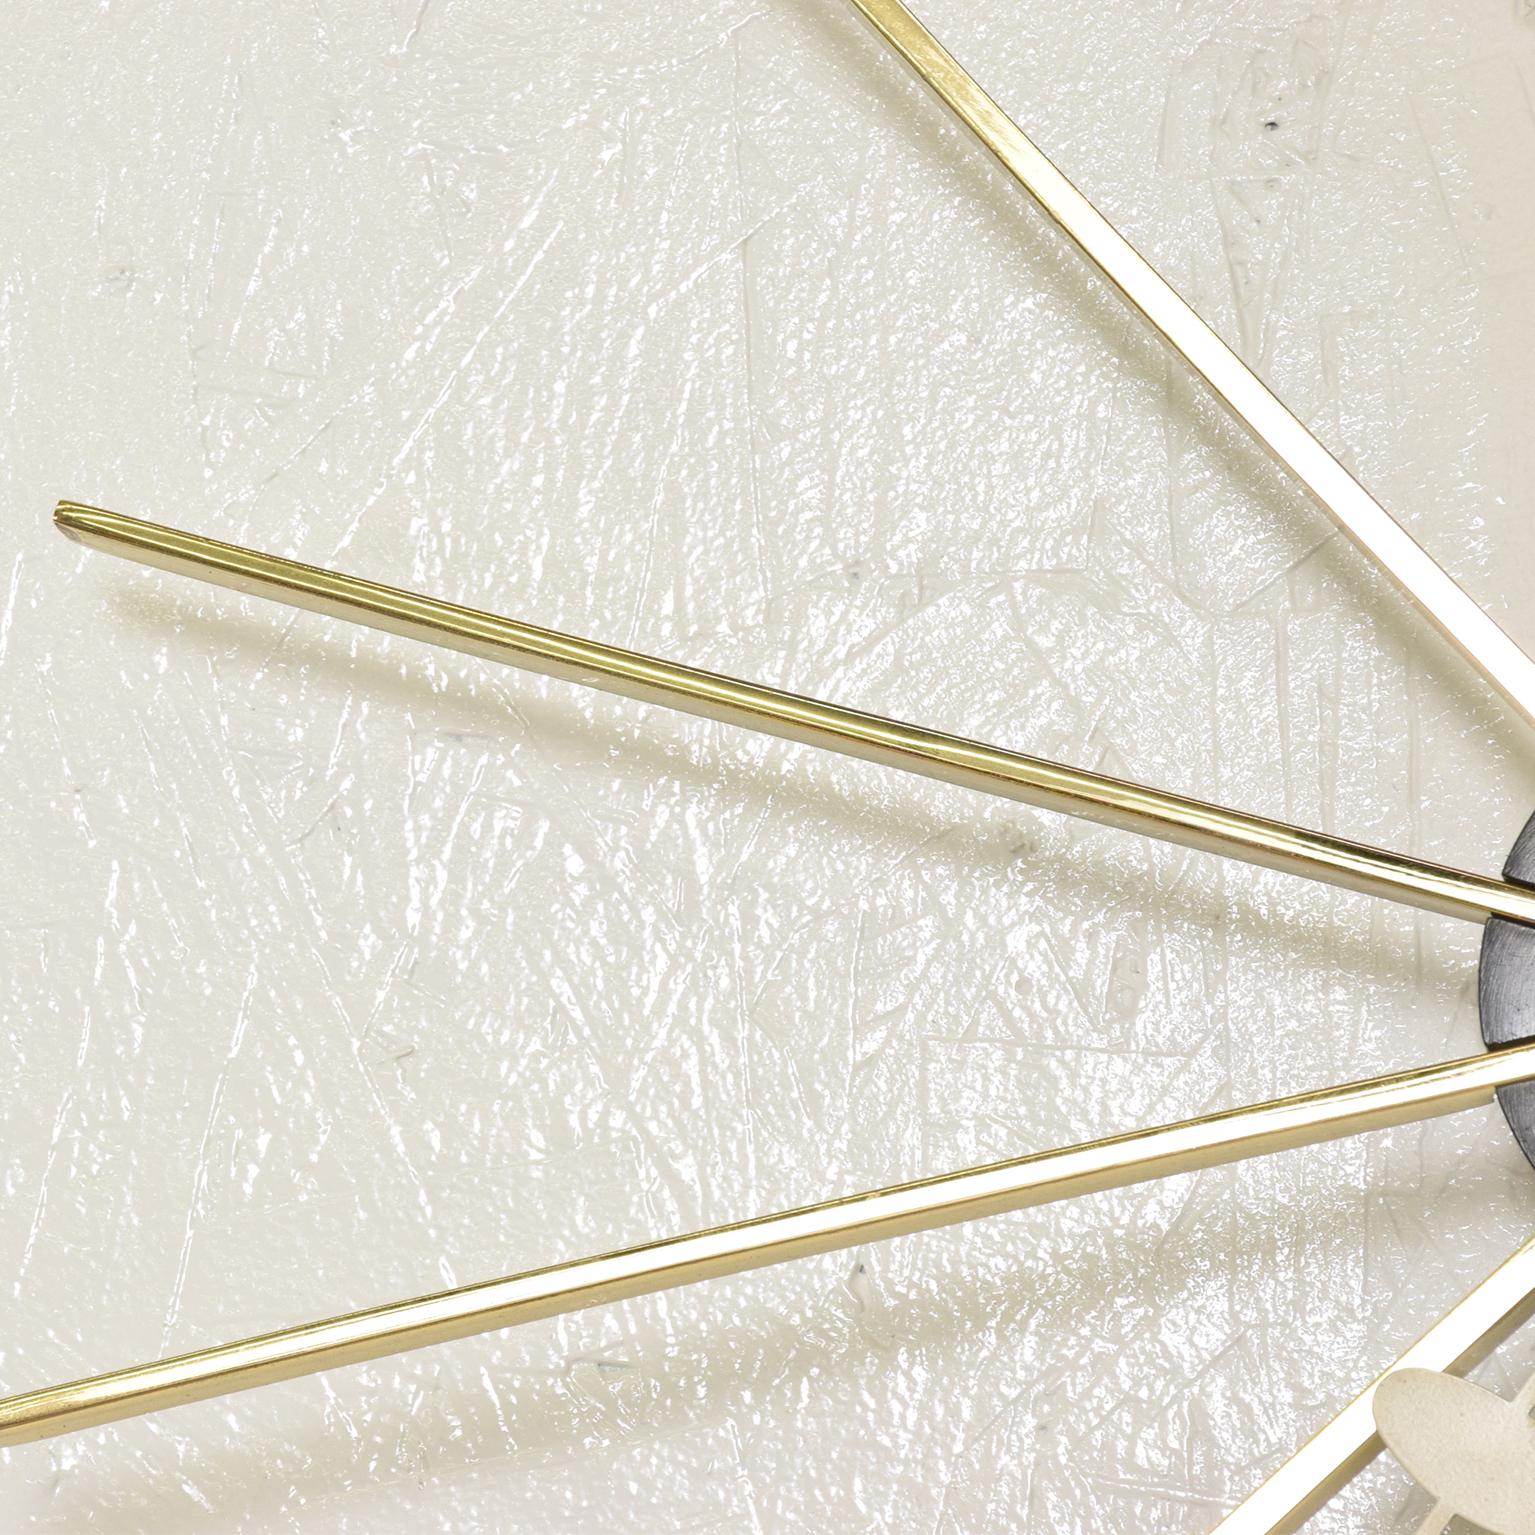 Metalwork Mid-Century Modern Wall Clock by George Nelson for Howard Miller